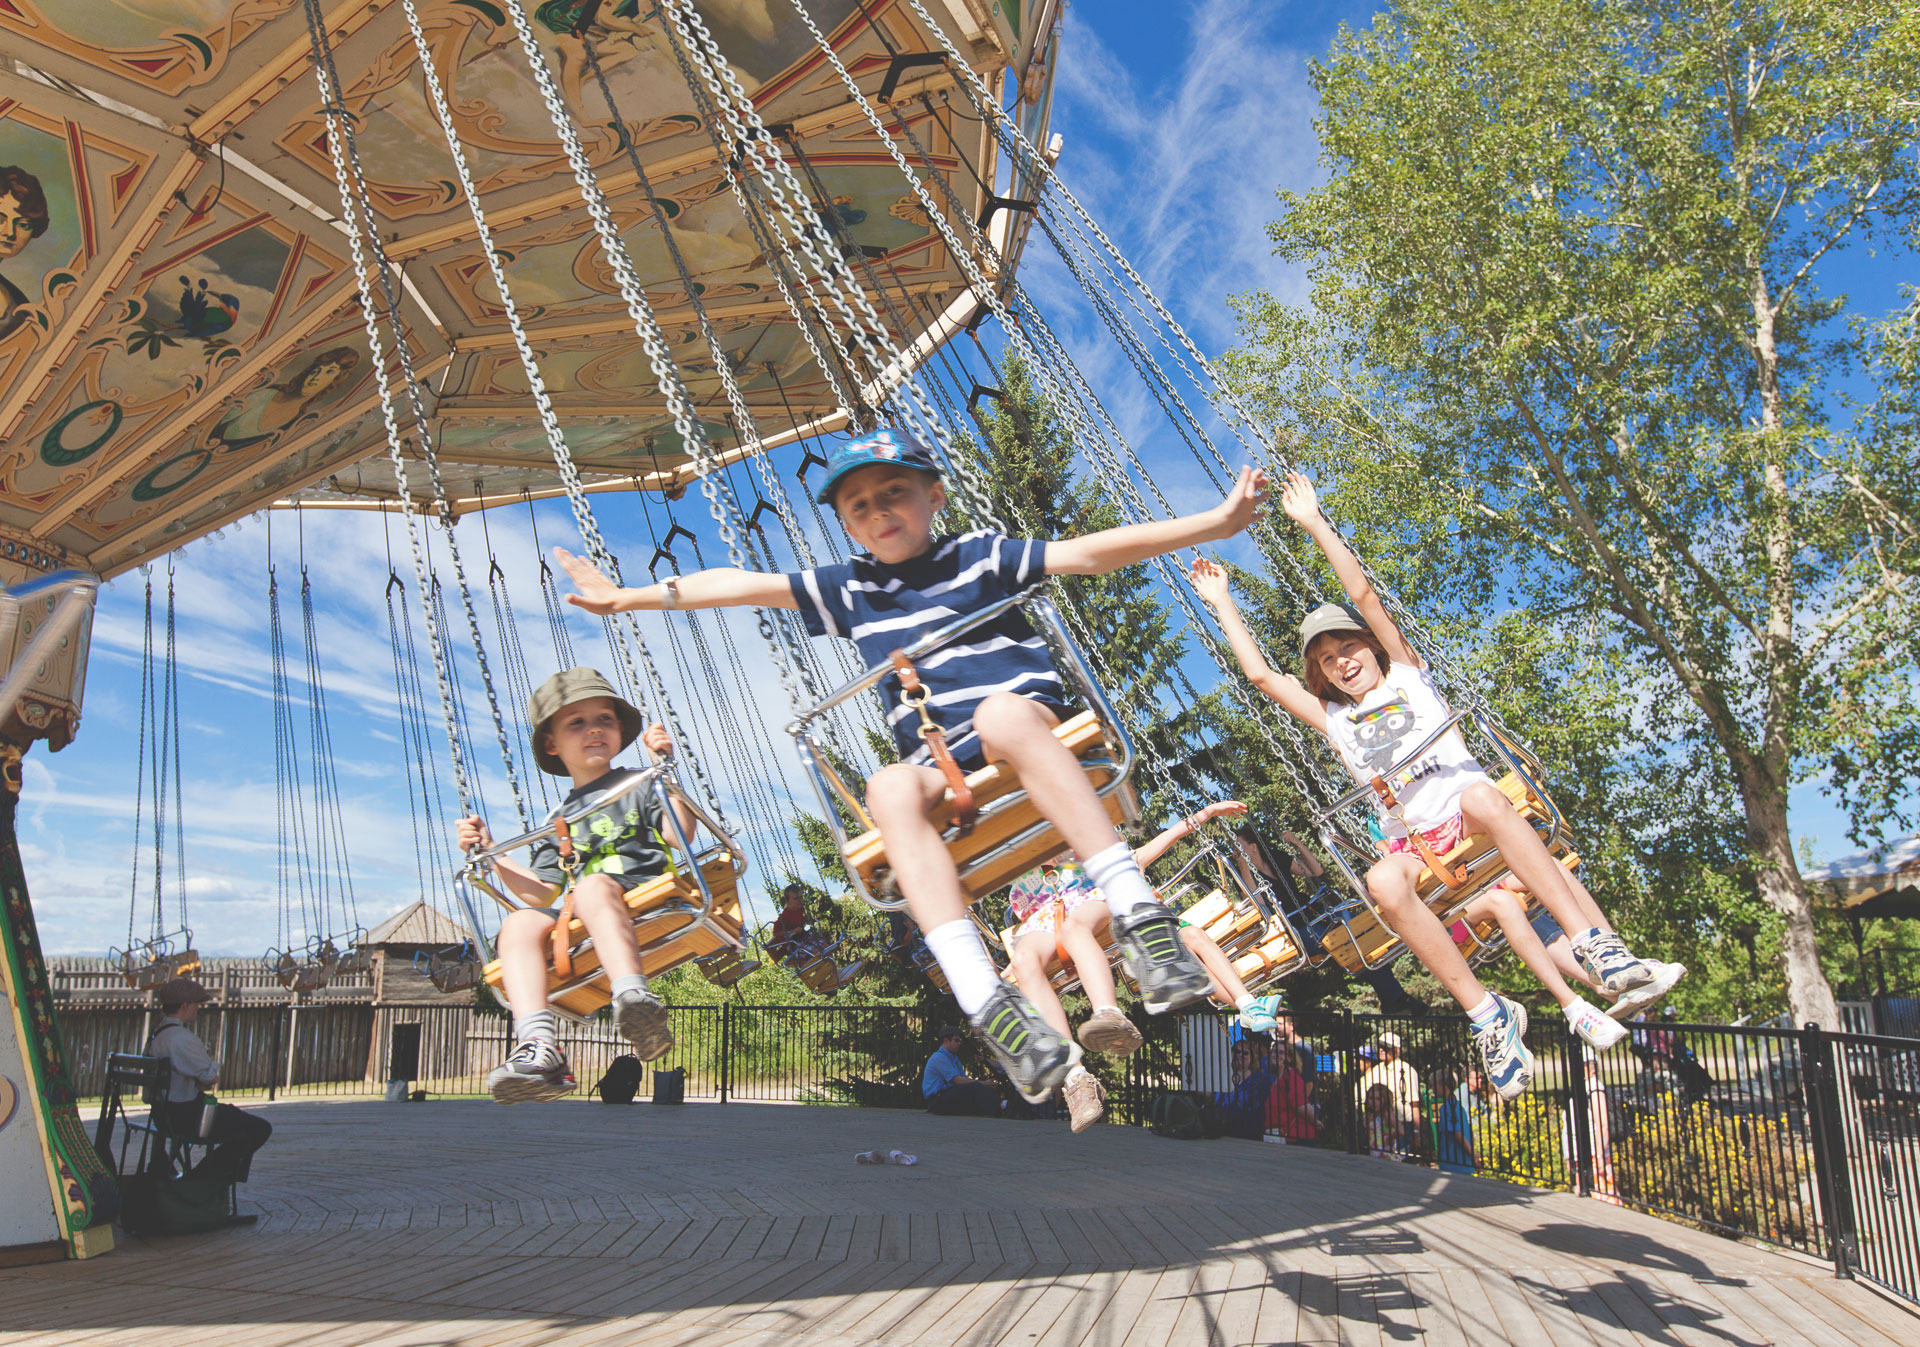 Ride the vintage midway at Heritage Park this summer.